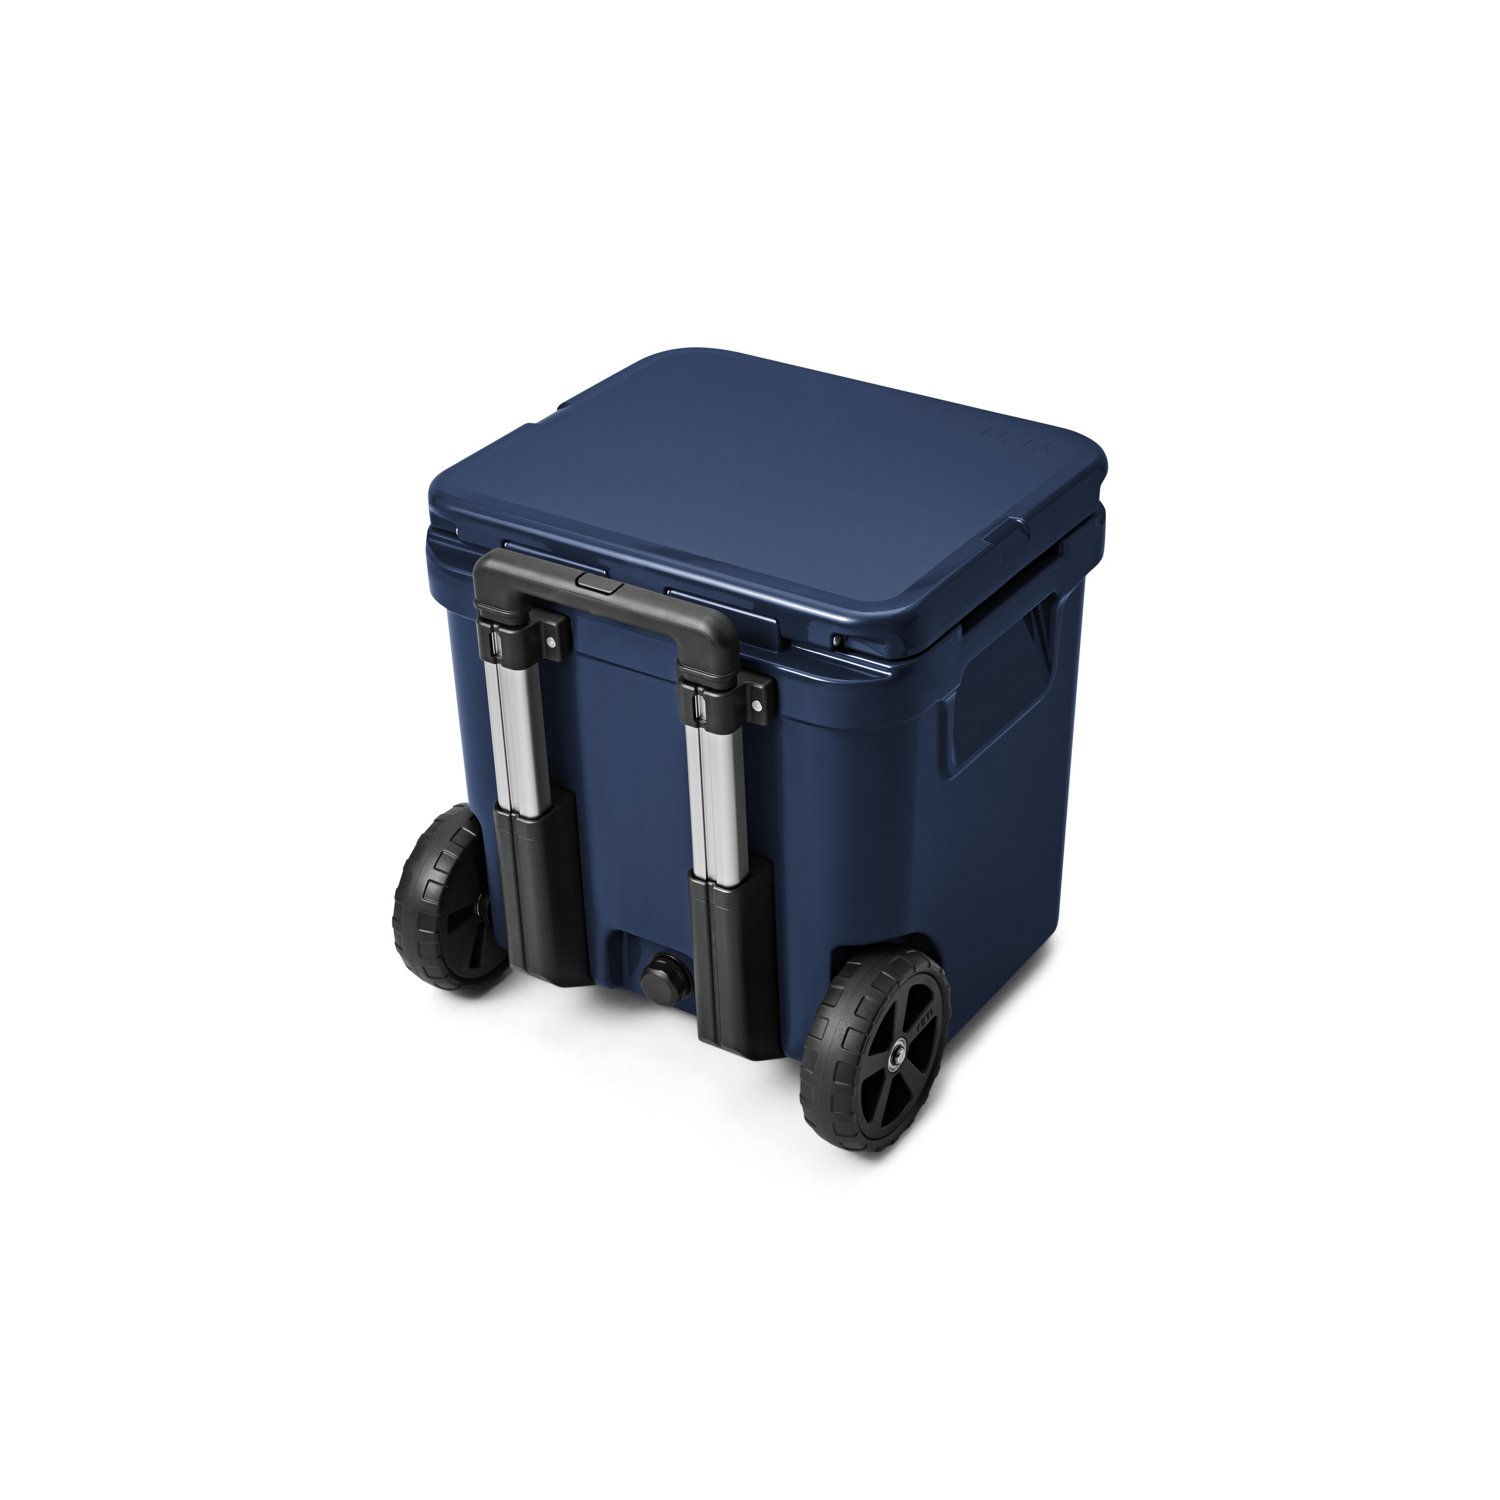 https://academy.scene7.com/is/image/academy///camping/coolers/blue_yeti-roadie-48-wheeled-cooler_10048200000/3c953abc4d534fbd95c2fe6f9eb13438?$pdp-mobile-gallery-ng$